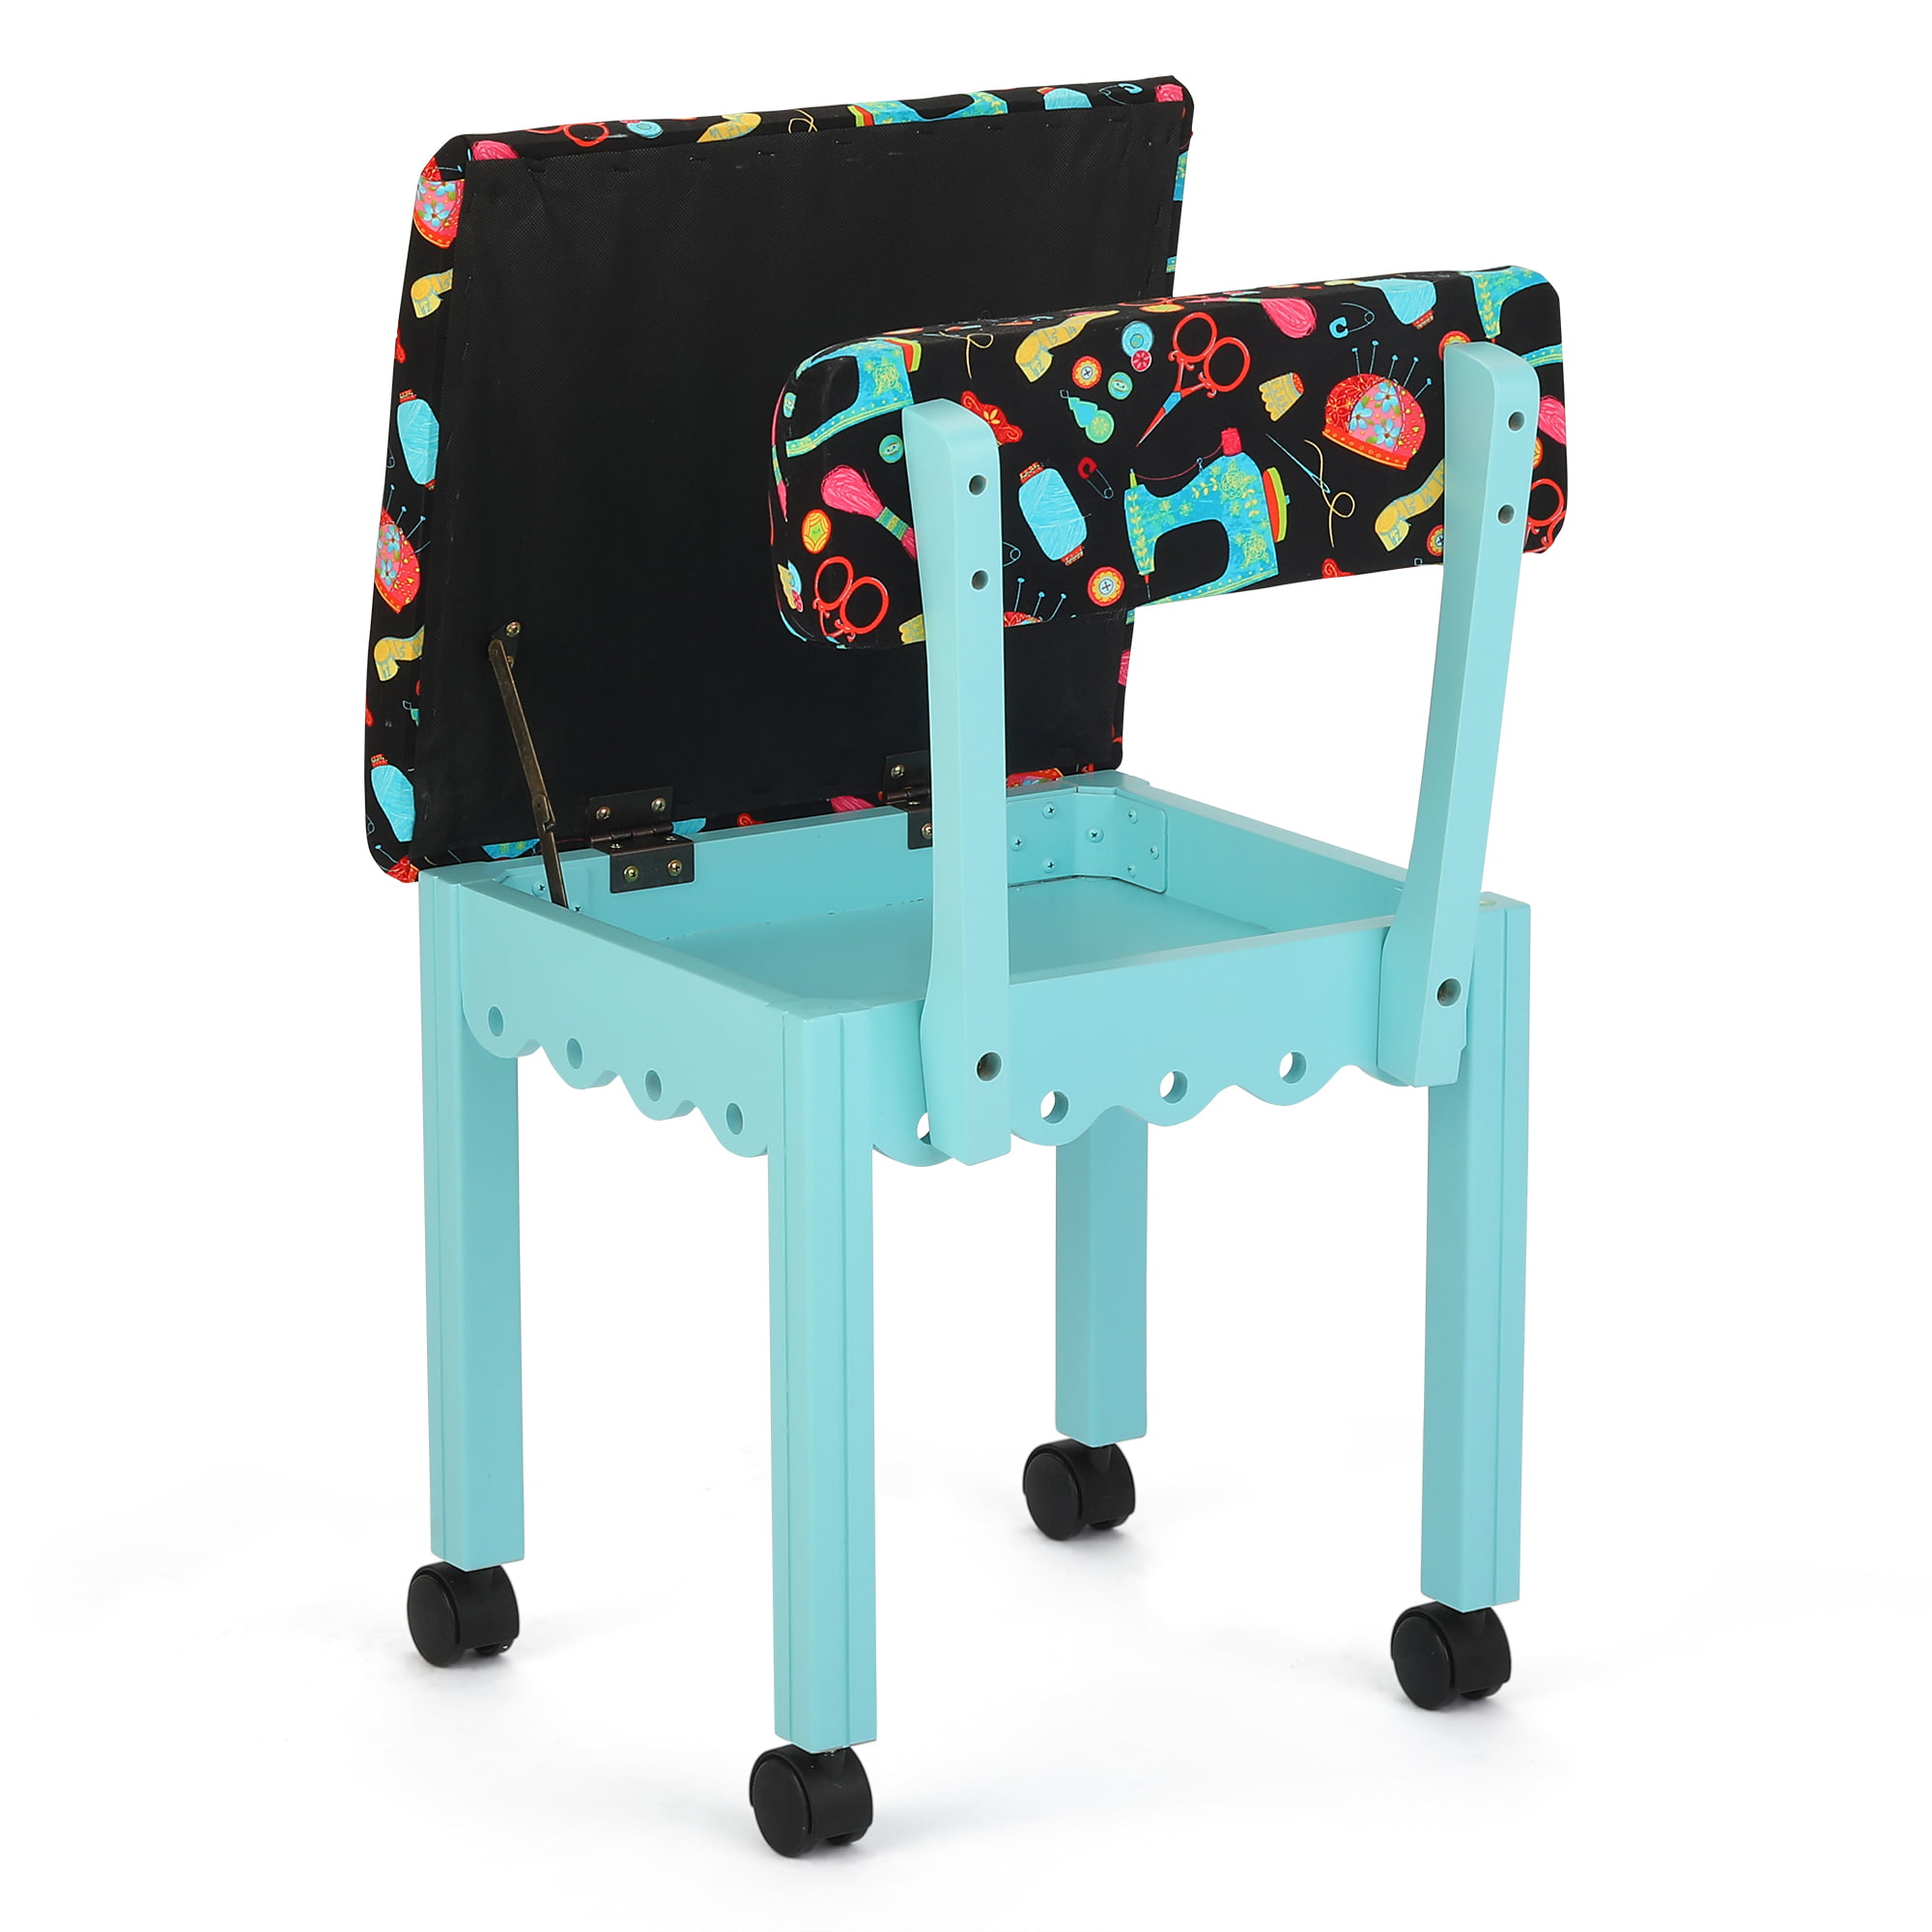 Craft Room Essential: Sewing Chair with Ruler Graphic and Secret